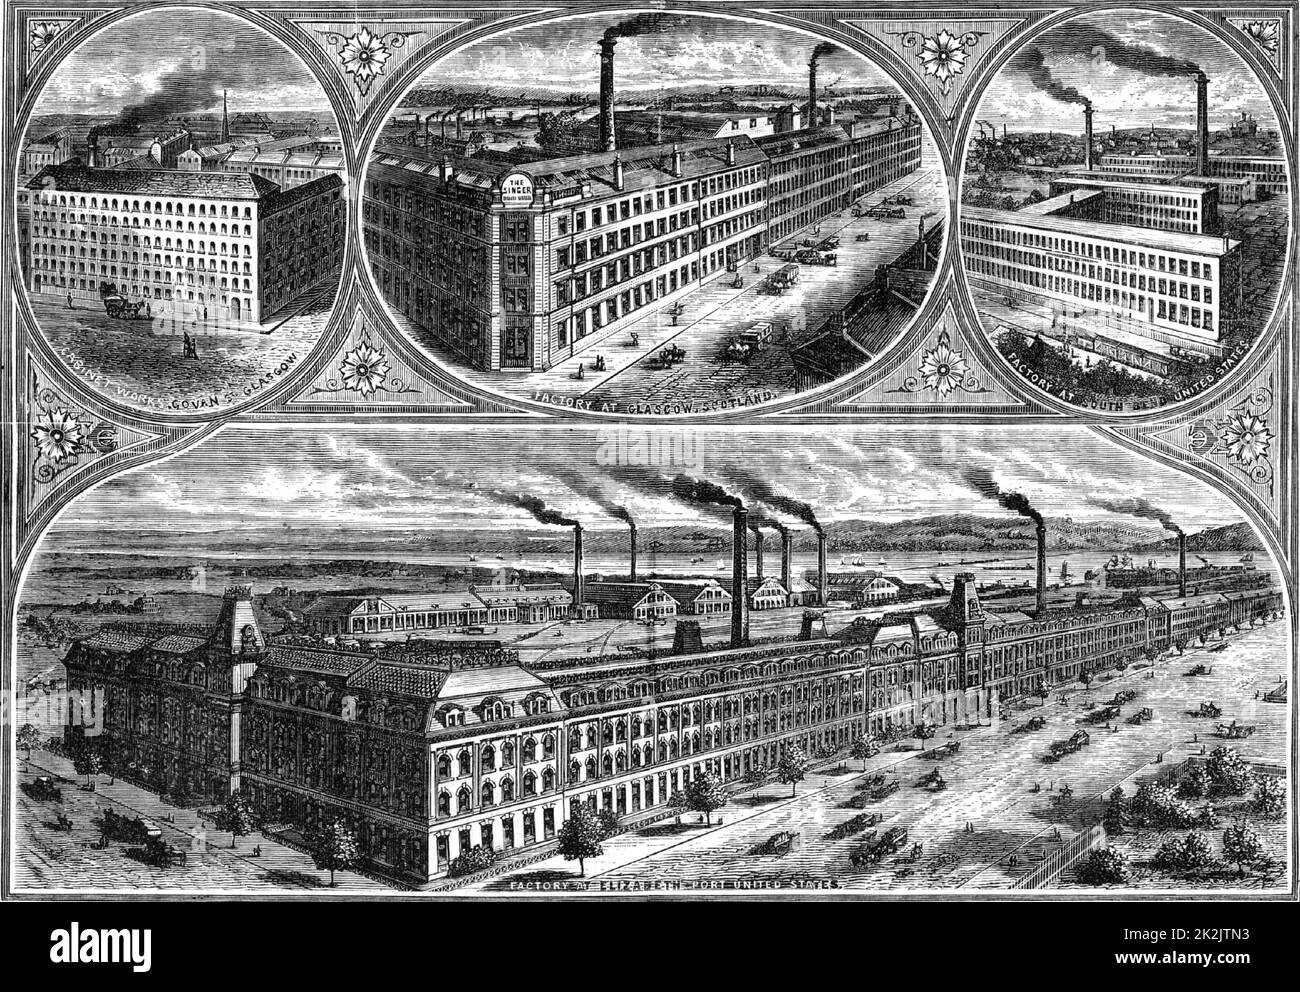 Factories of the Singer Sewing Machine company. Top left. Cabinet works at Govan, Glasgow, Scotland. Centre top. Factory at Glasgow, Scotland. Top right. Factory at South Bend, Indiana, usa. Bottom. Factory at Elizabethport, New Jersey, usa. From 'Great Industries of Great Britain' (London, c1880). Engraving. Stock Photo